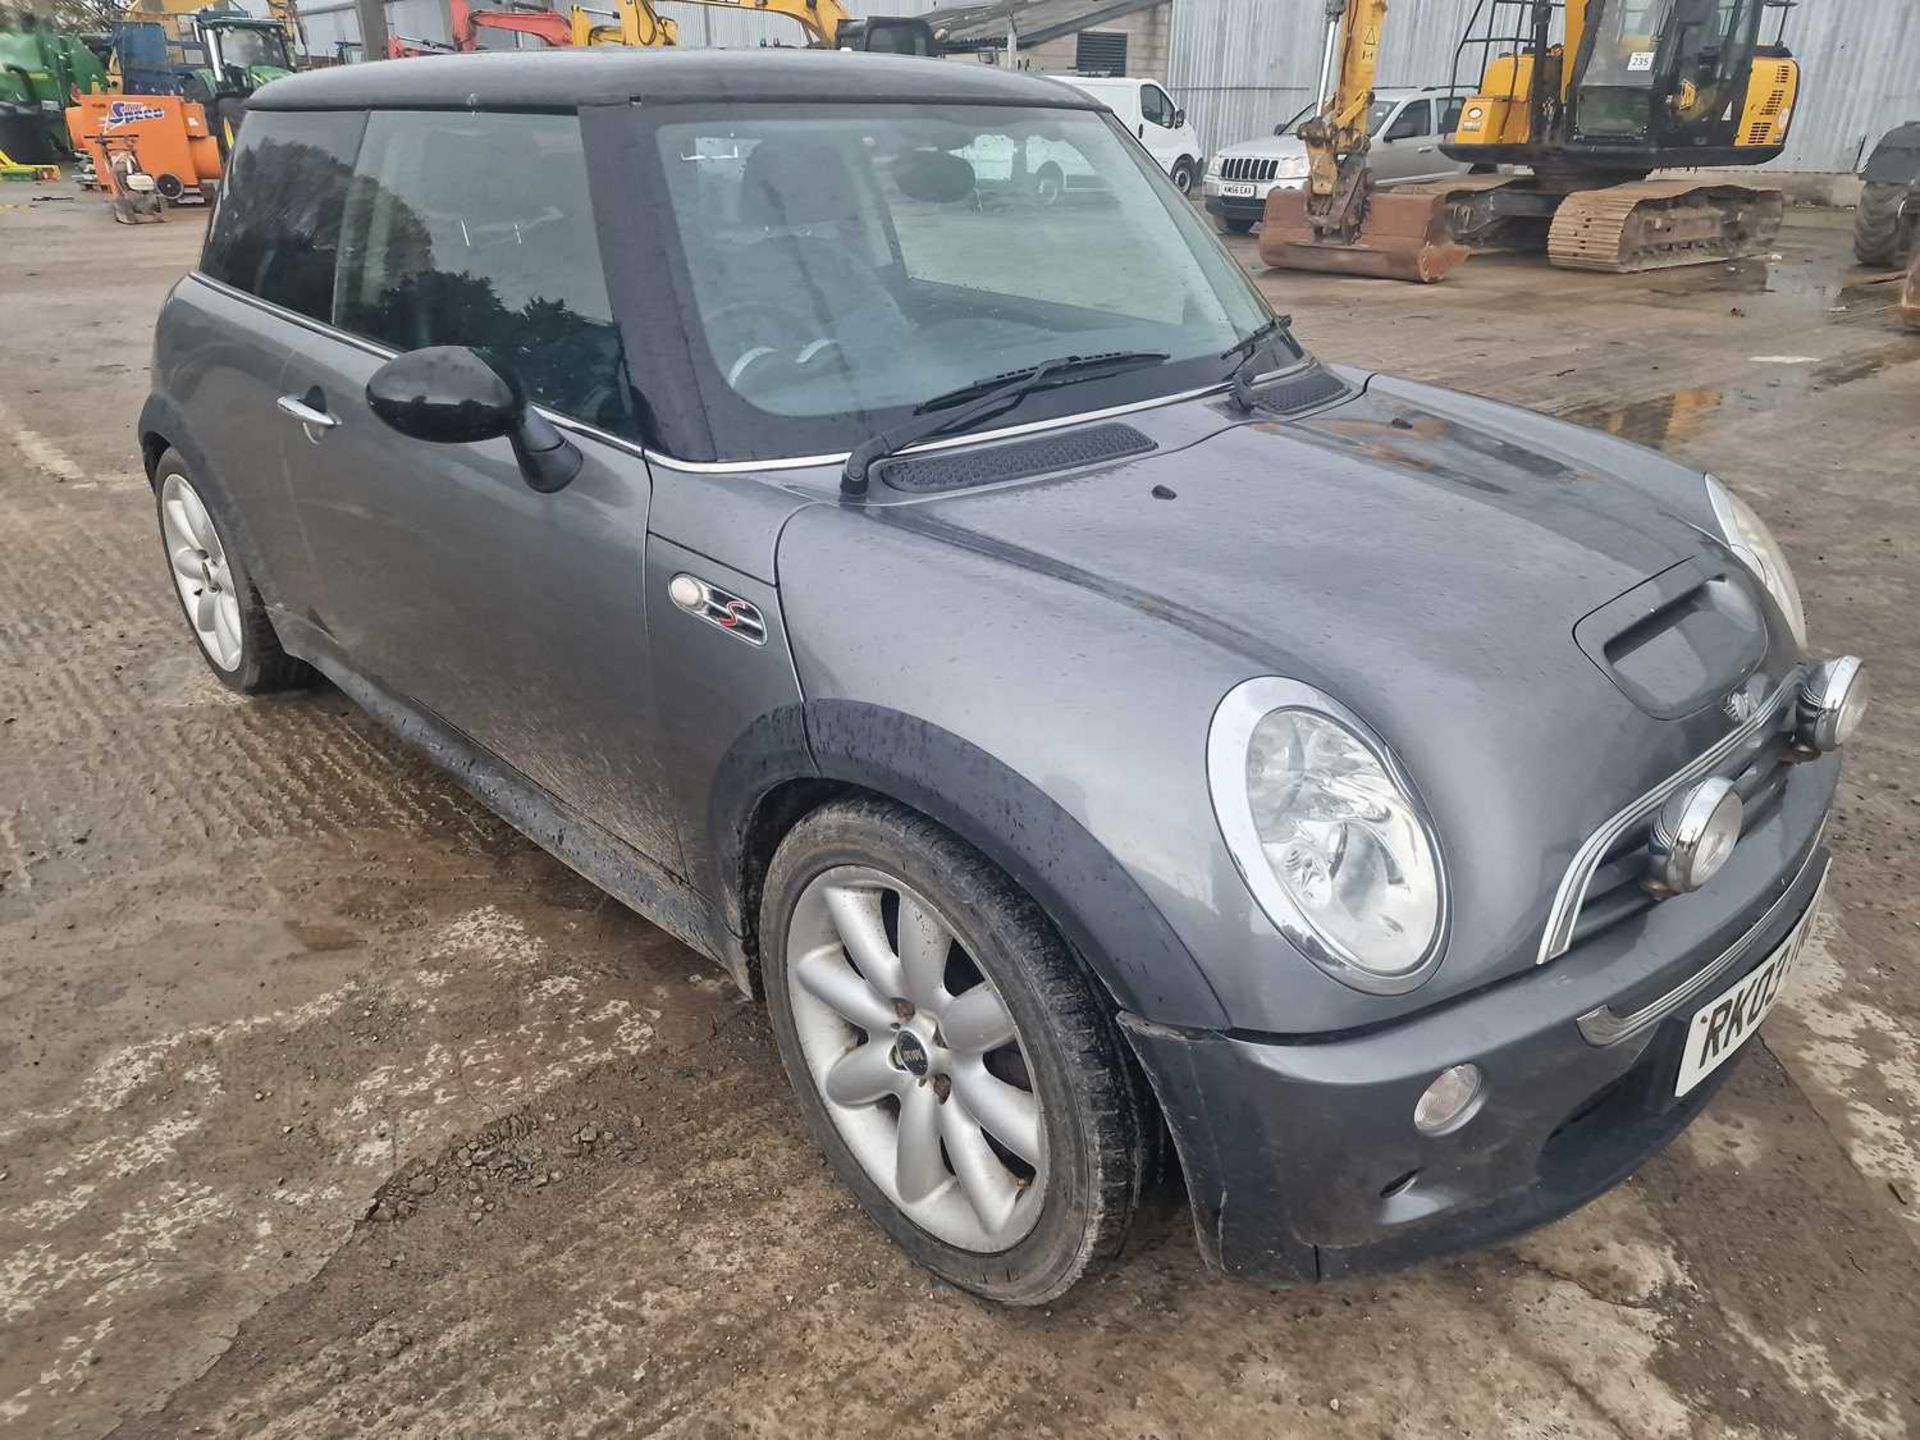 Mini Cooper S 6 Speed, Full Leather, Cruise Control, A/C, Double Sun Roof (Reg. Docs. Available) - Image 7 of 24